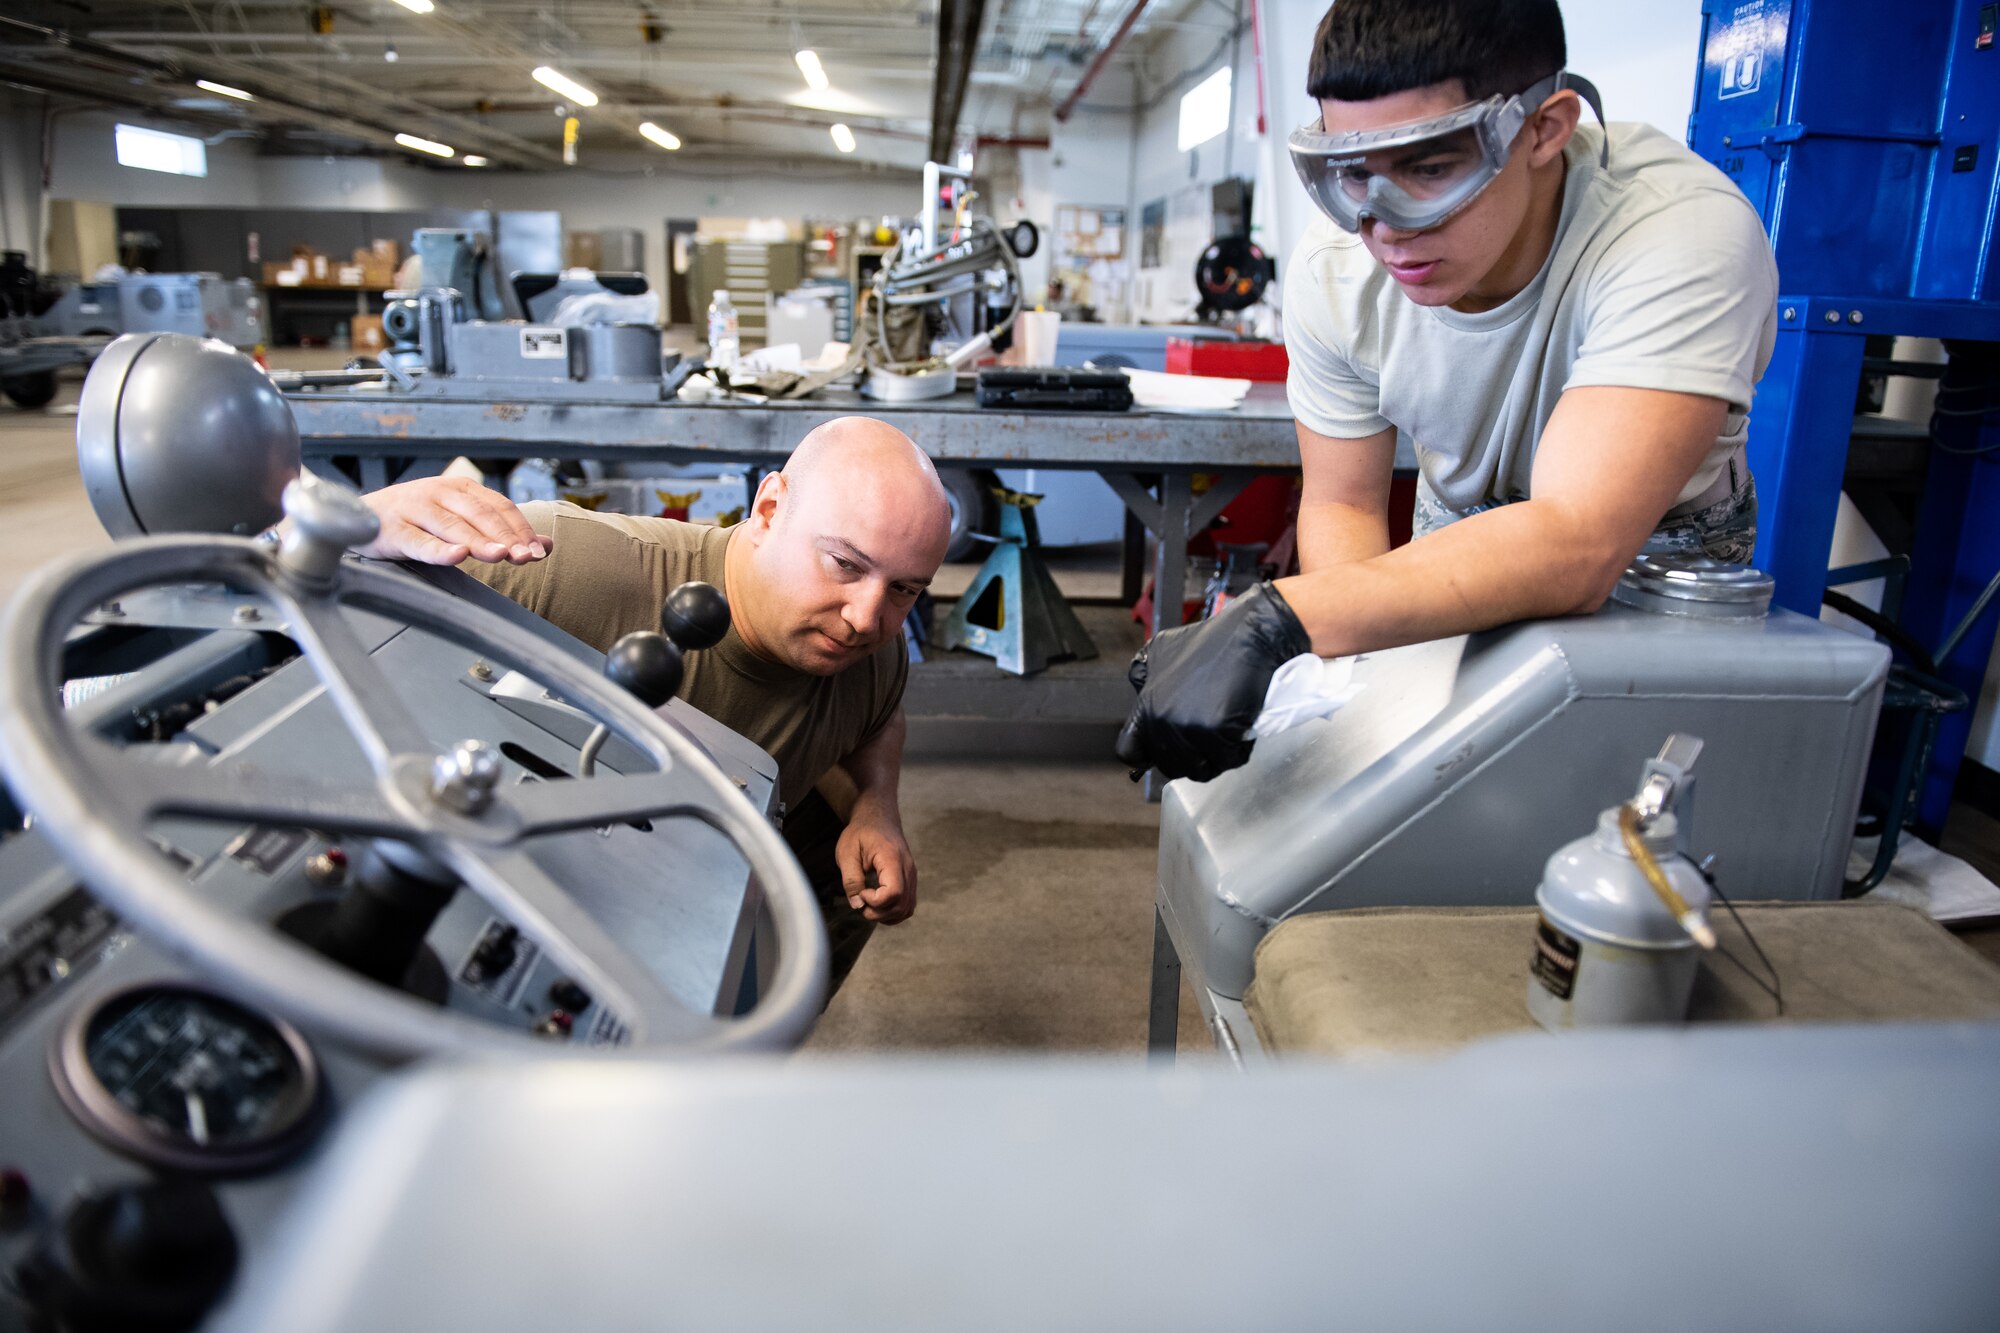 Tech. Sgt. Boris Raykhel, left, and Airman 1st Class Javier Saldana, 388th Aerospace Ground Equipment Flight, inspect a munitions loader during maintenance at Hill Air Force Base, Utah, Oct. 4, 2019. Unit Airmen maintain over 600 pieces of equipment that support the mission of crew chiefs, avionics, weapons and ammo troops. (U.S. Air Force photo by R. Nial Bradshaw)